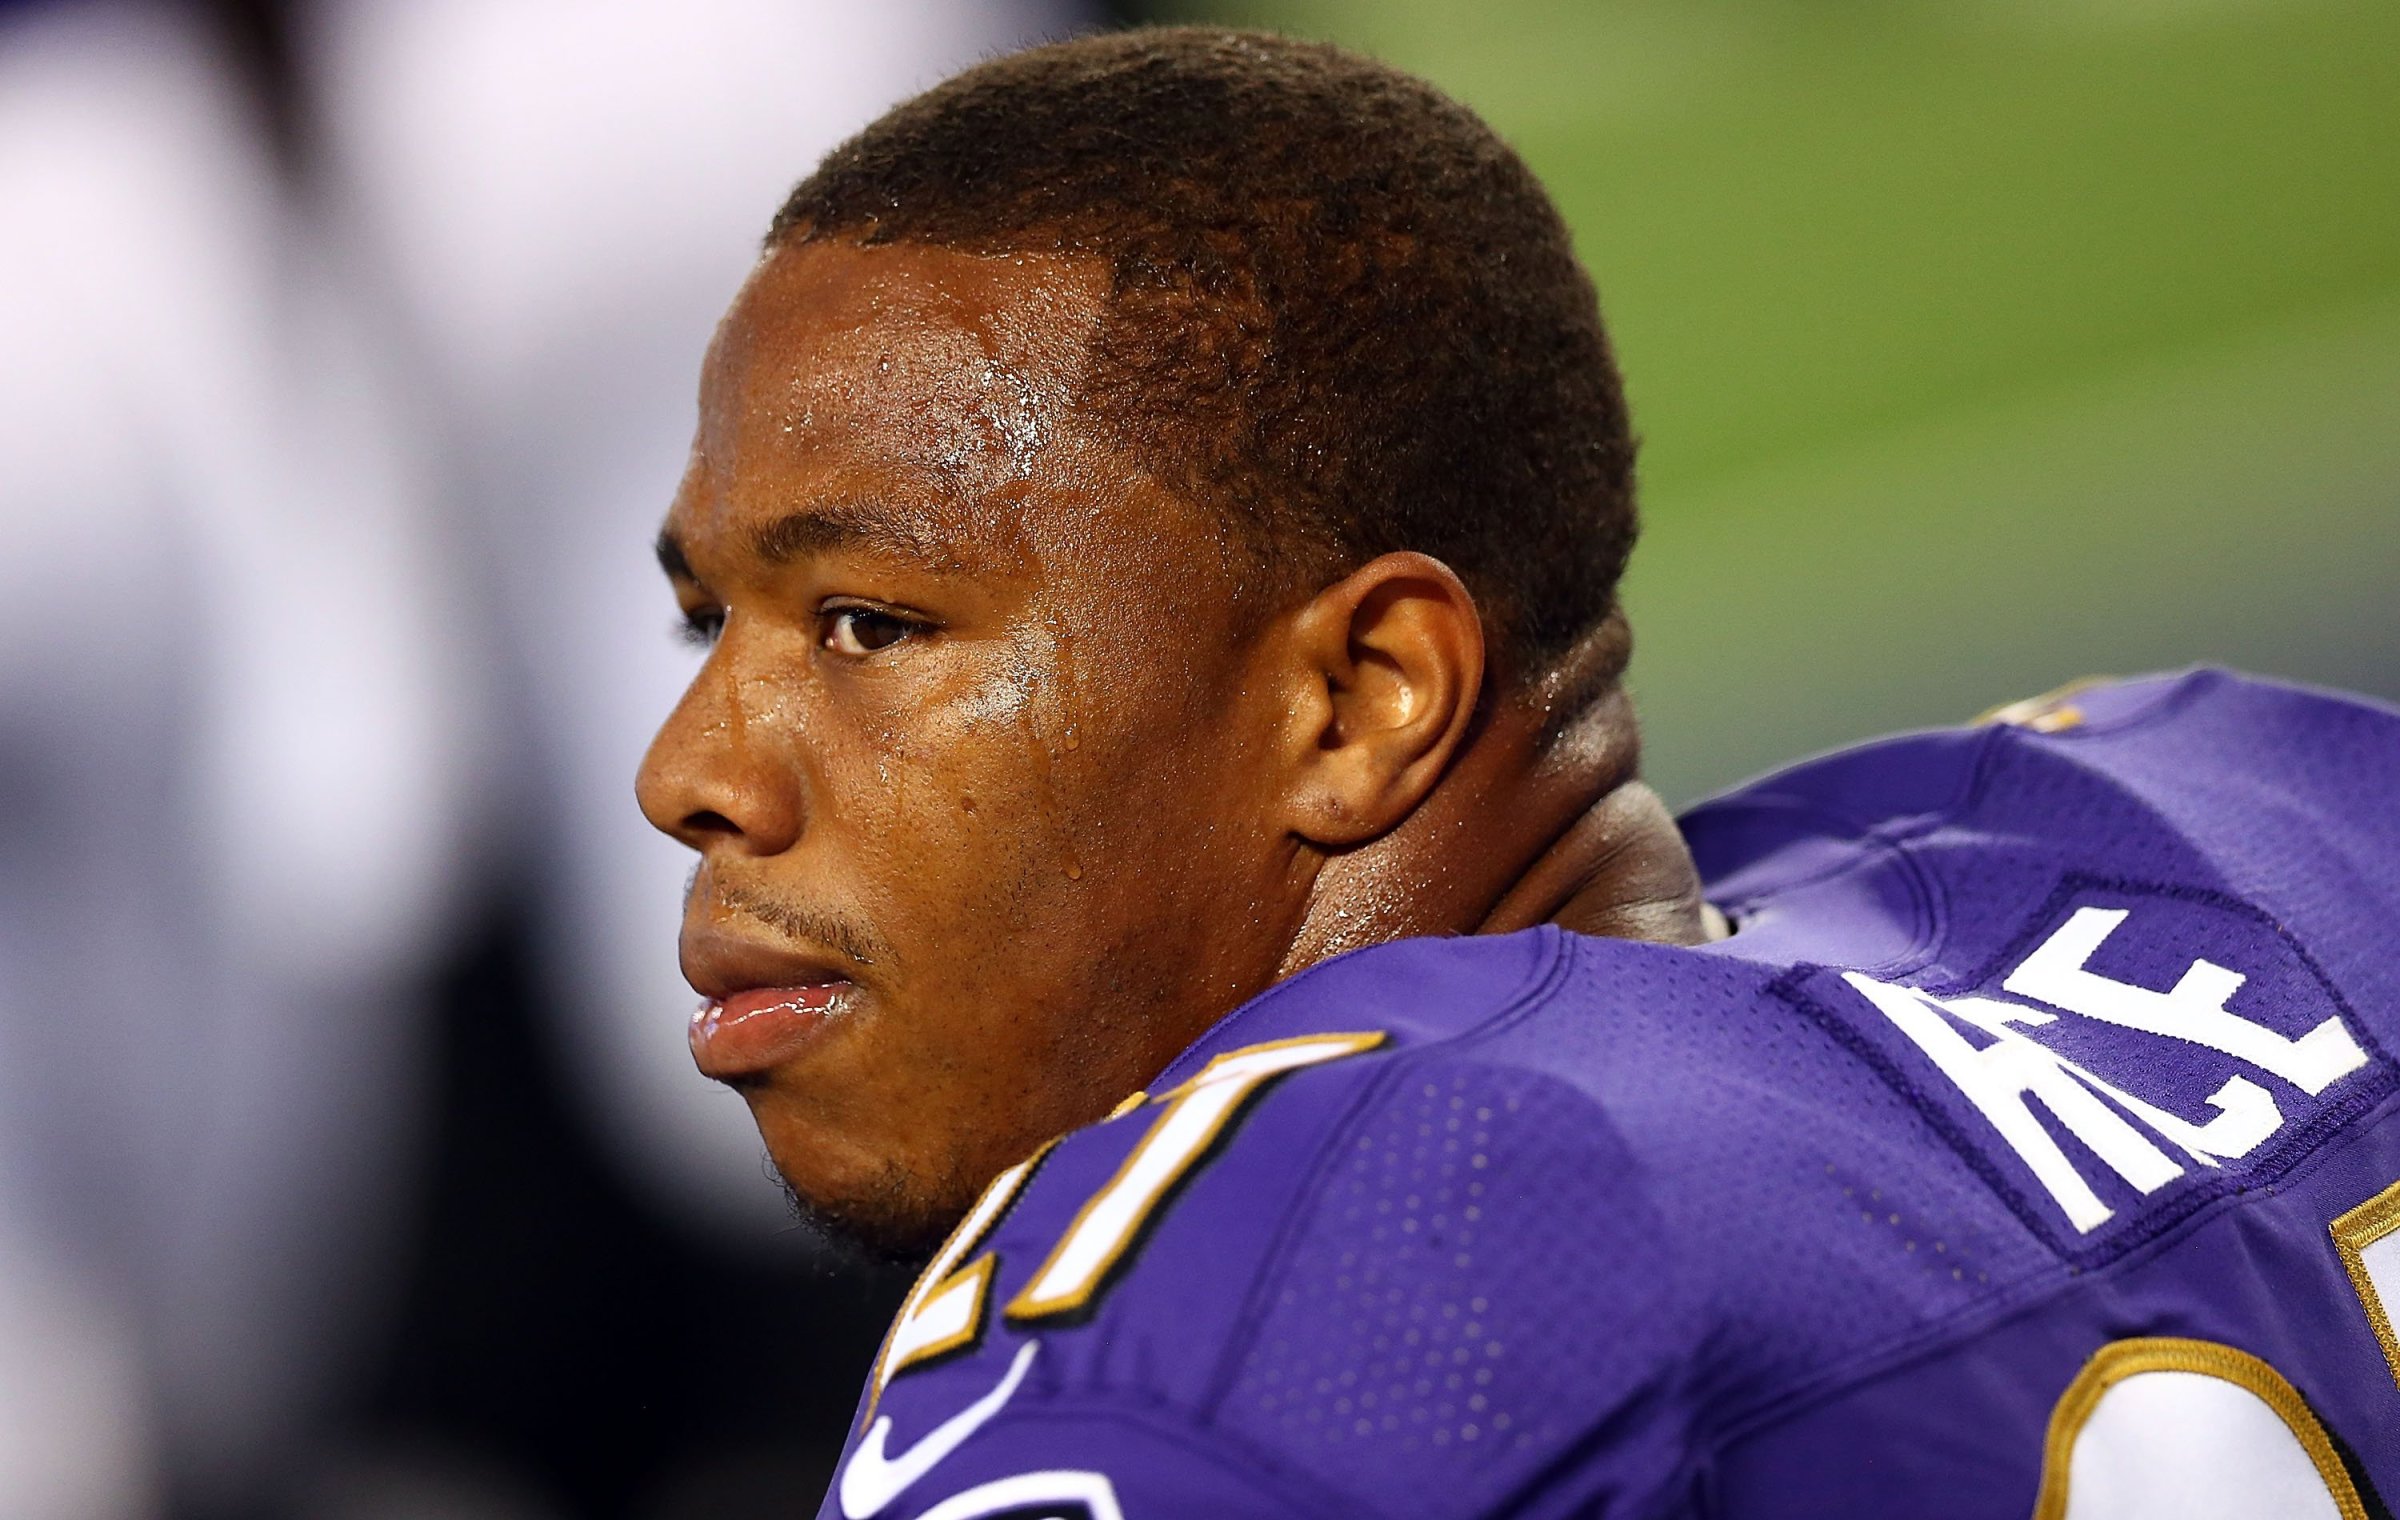 Ray Rice of the Baltimore Ravens sits on the bench against the Dallas Cowboys in the first half of their preseason game on Aug. 16, 2014 in Arlington, Texas.